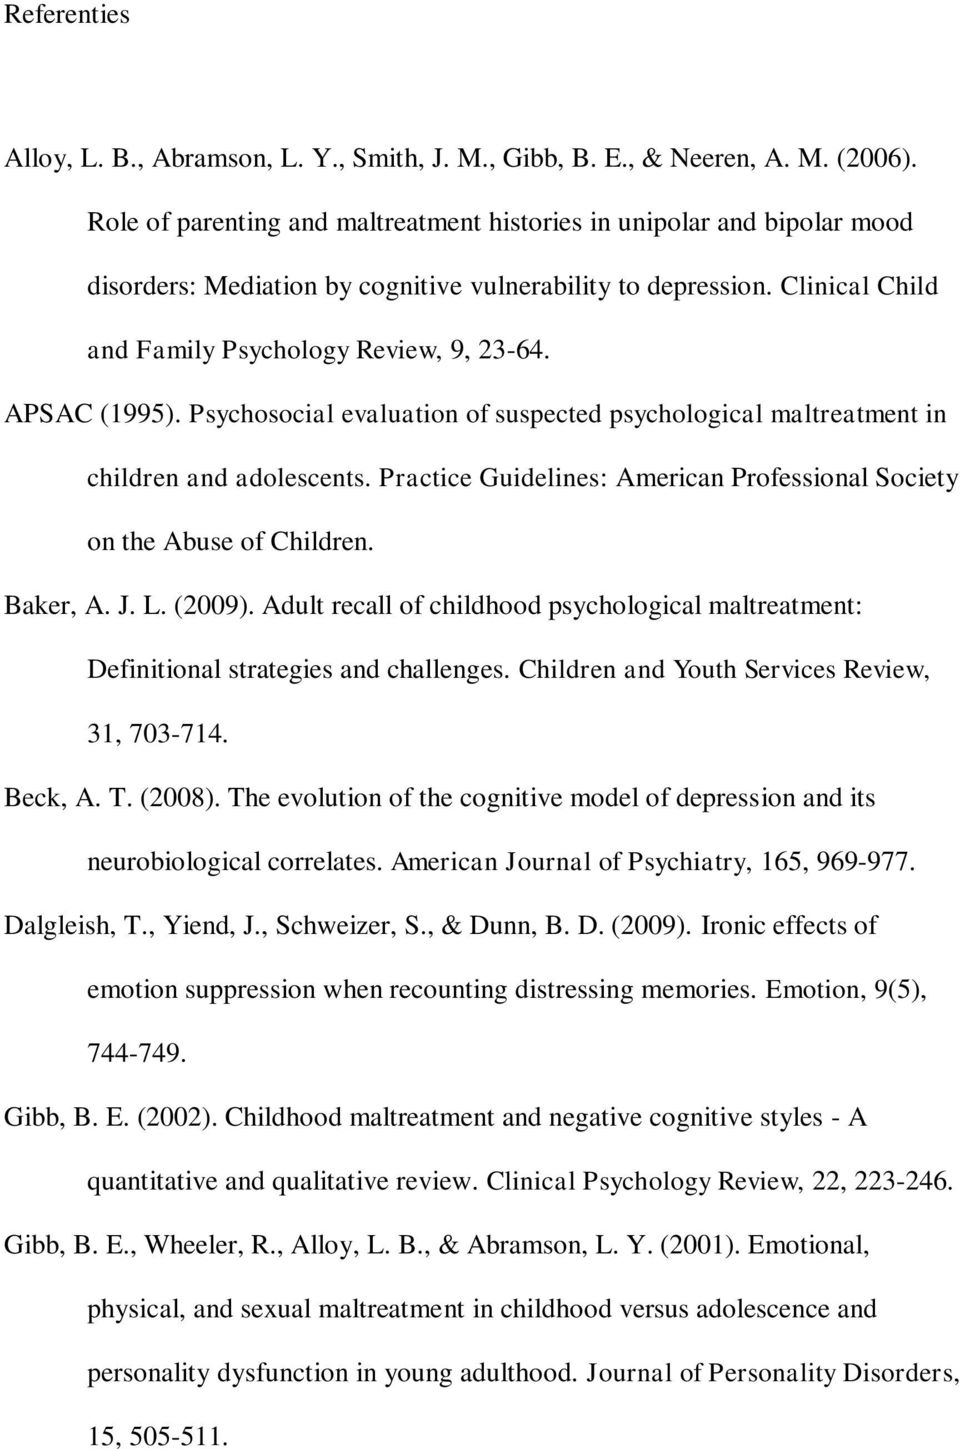 APSAC (1995). Psychosocial evaluation of suspected psychological maltreatment in children and adolescents. Practice Guidelines: American Professional Society on the Abuse of Children. Baker, A. J. L.